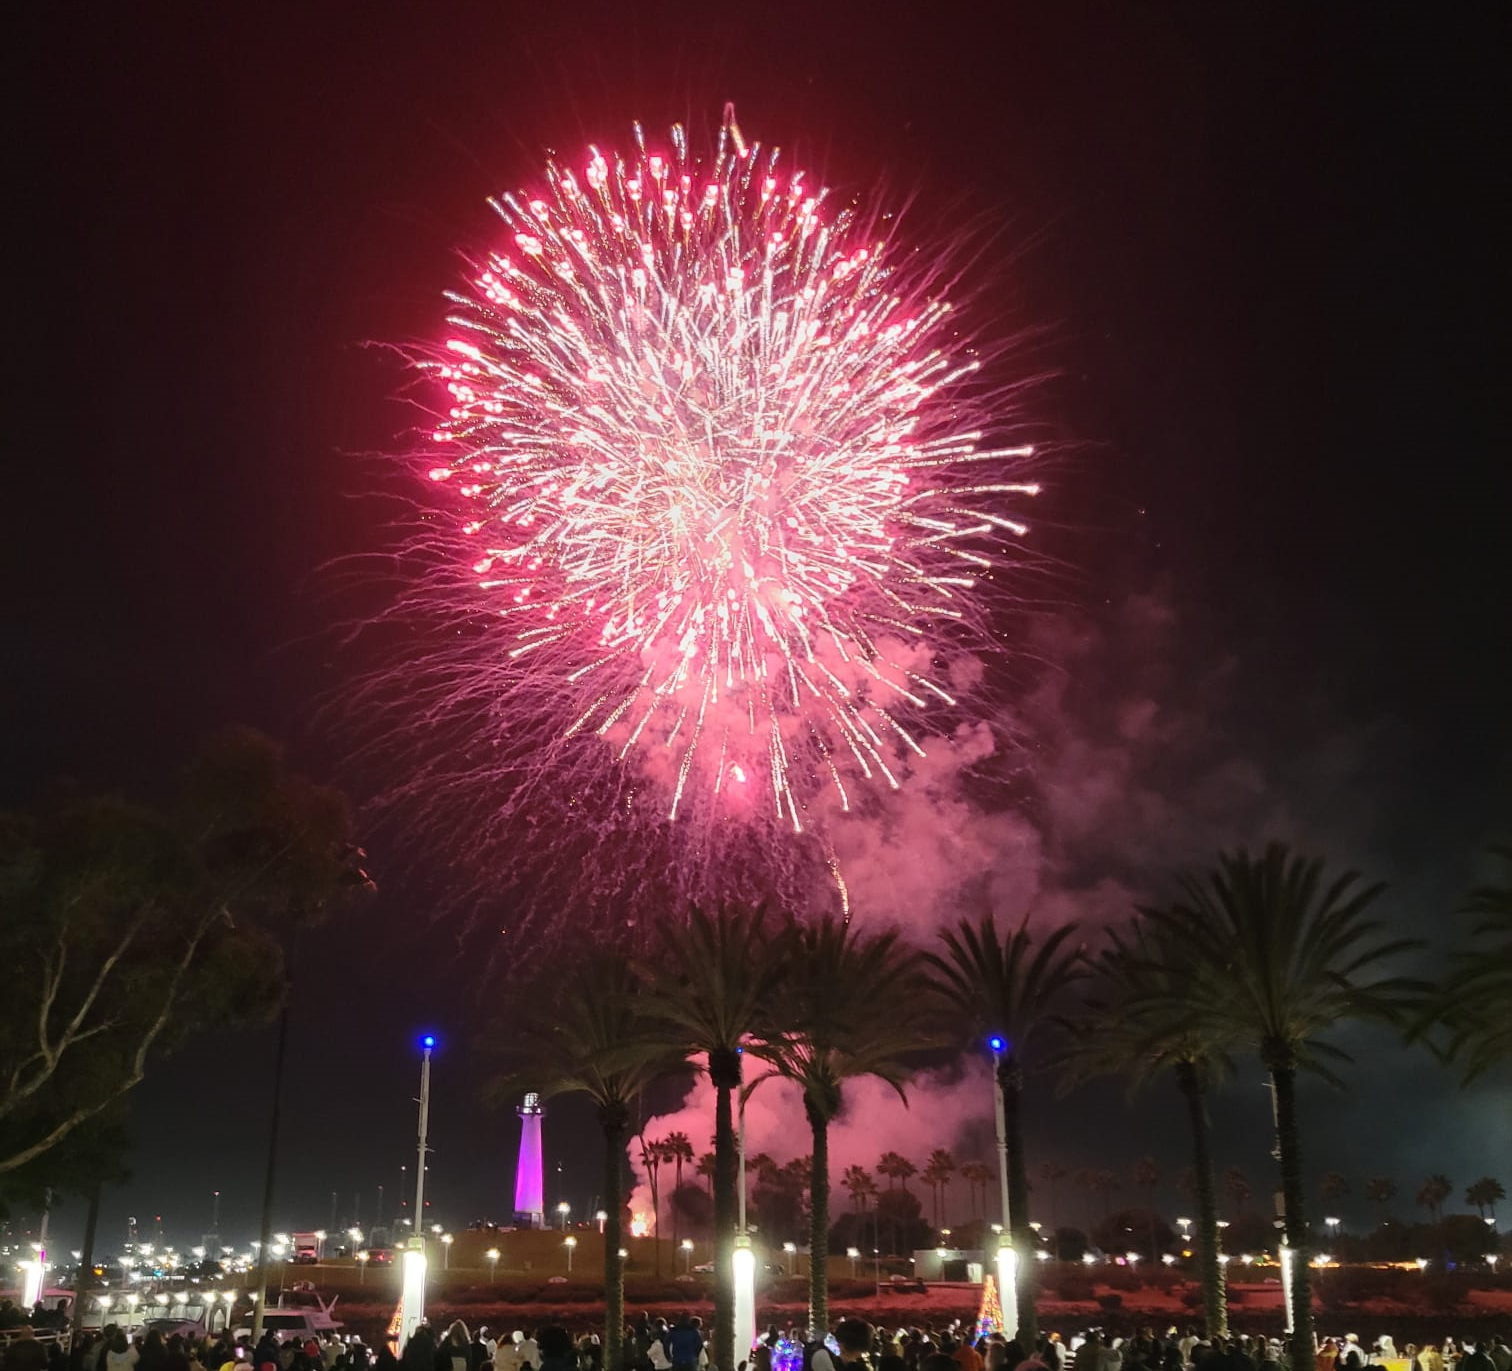 New year's eve celebration fireworks at Long Beach, CA.